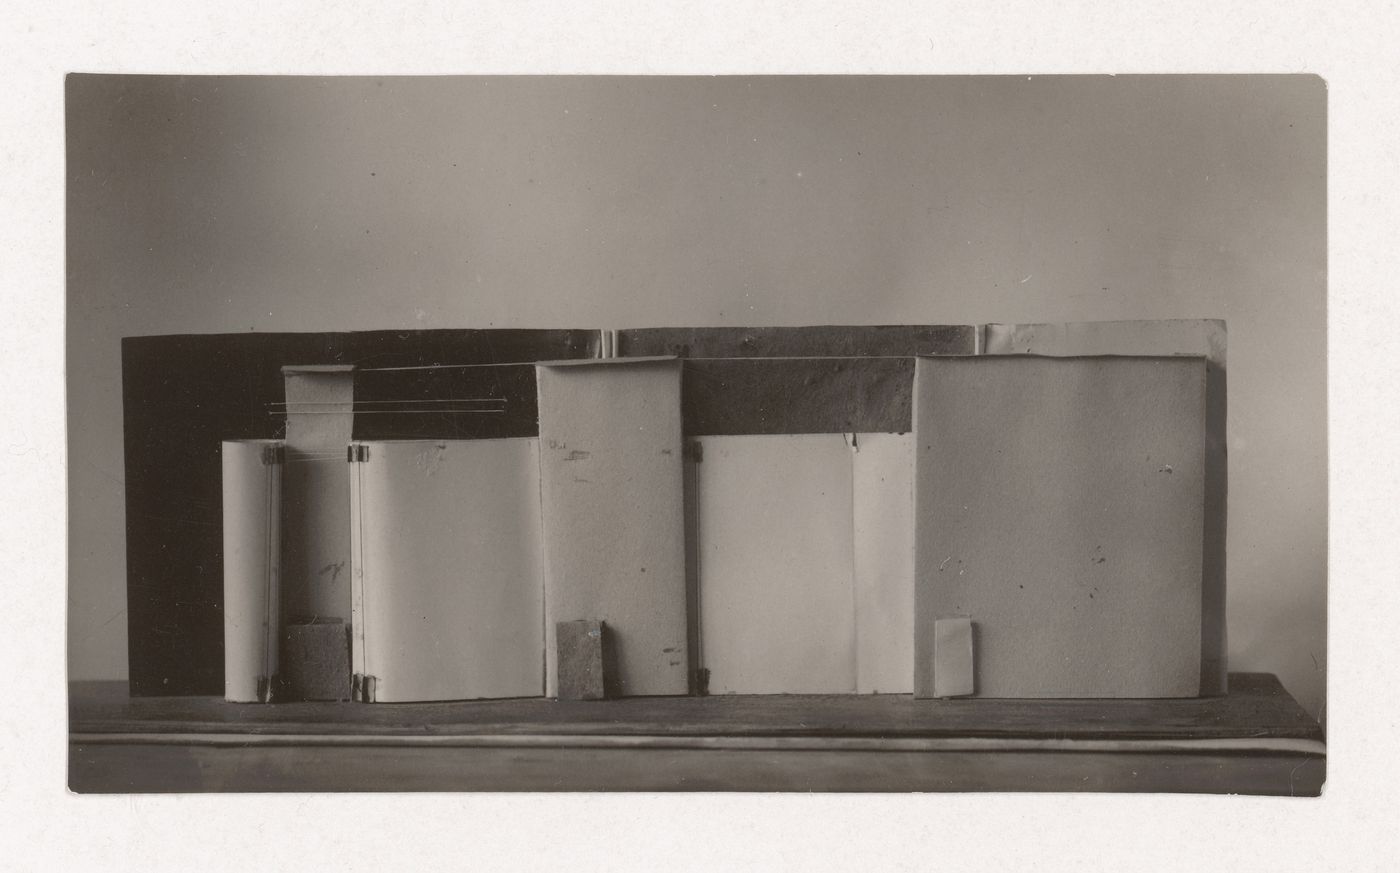 Photograph of a student model on the topic "Construction of Frontal Surface Based on Vertical, Horizontal and Inclined Combination of Two or More Rhythmical Rows" for the "Space" course at the Vkhutemas, Moscow